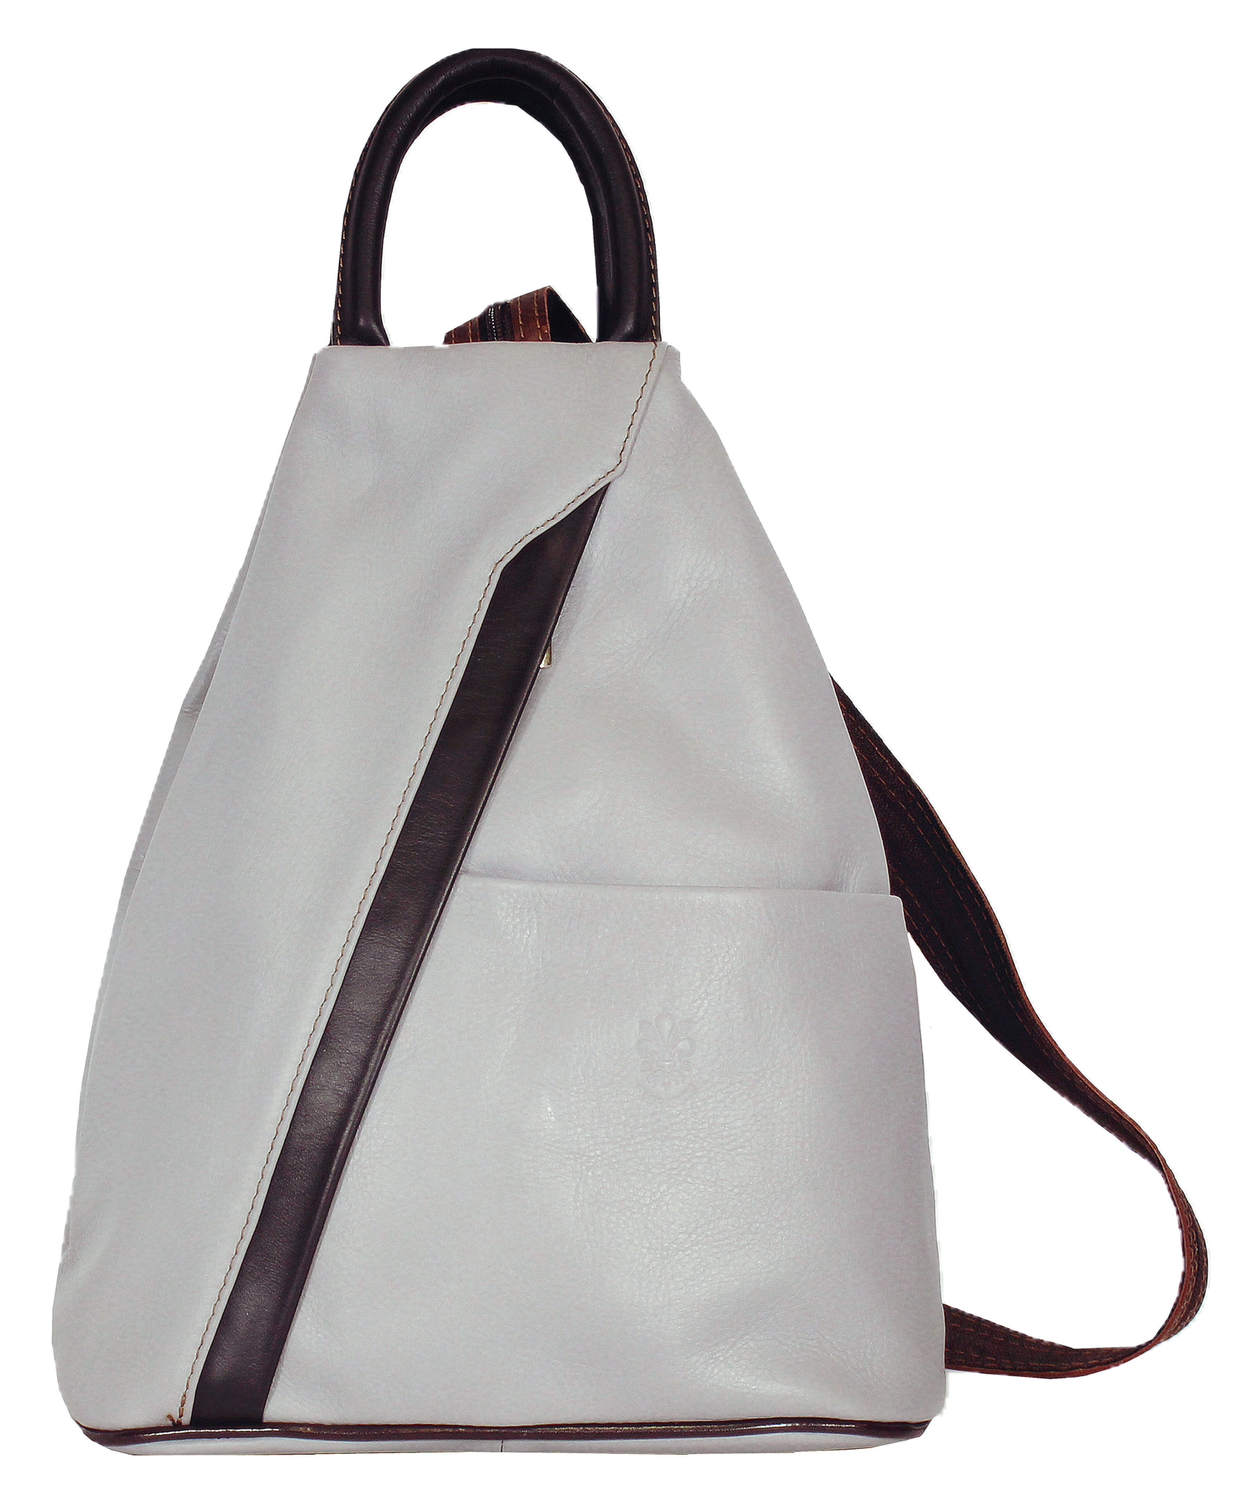 Light Grey With Chocolate Trim Soft Leather Backpack